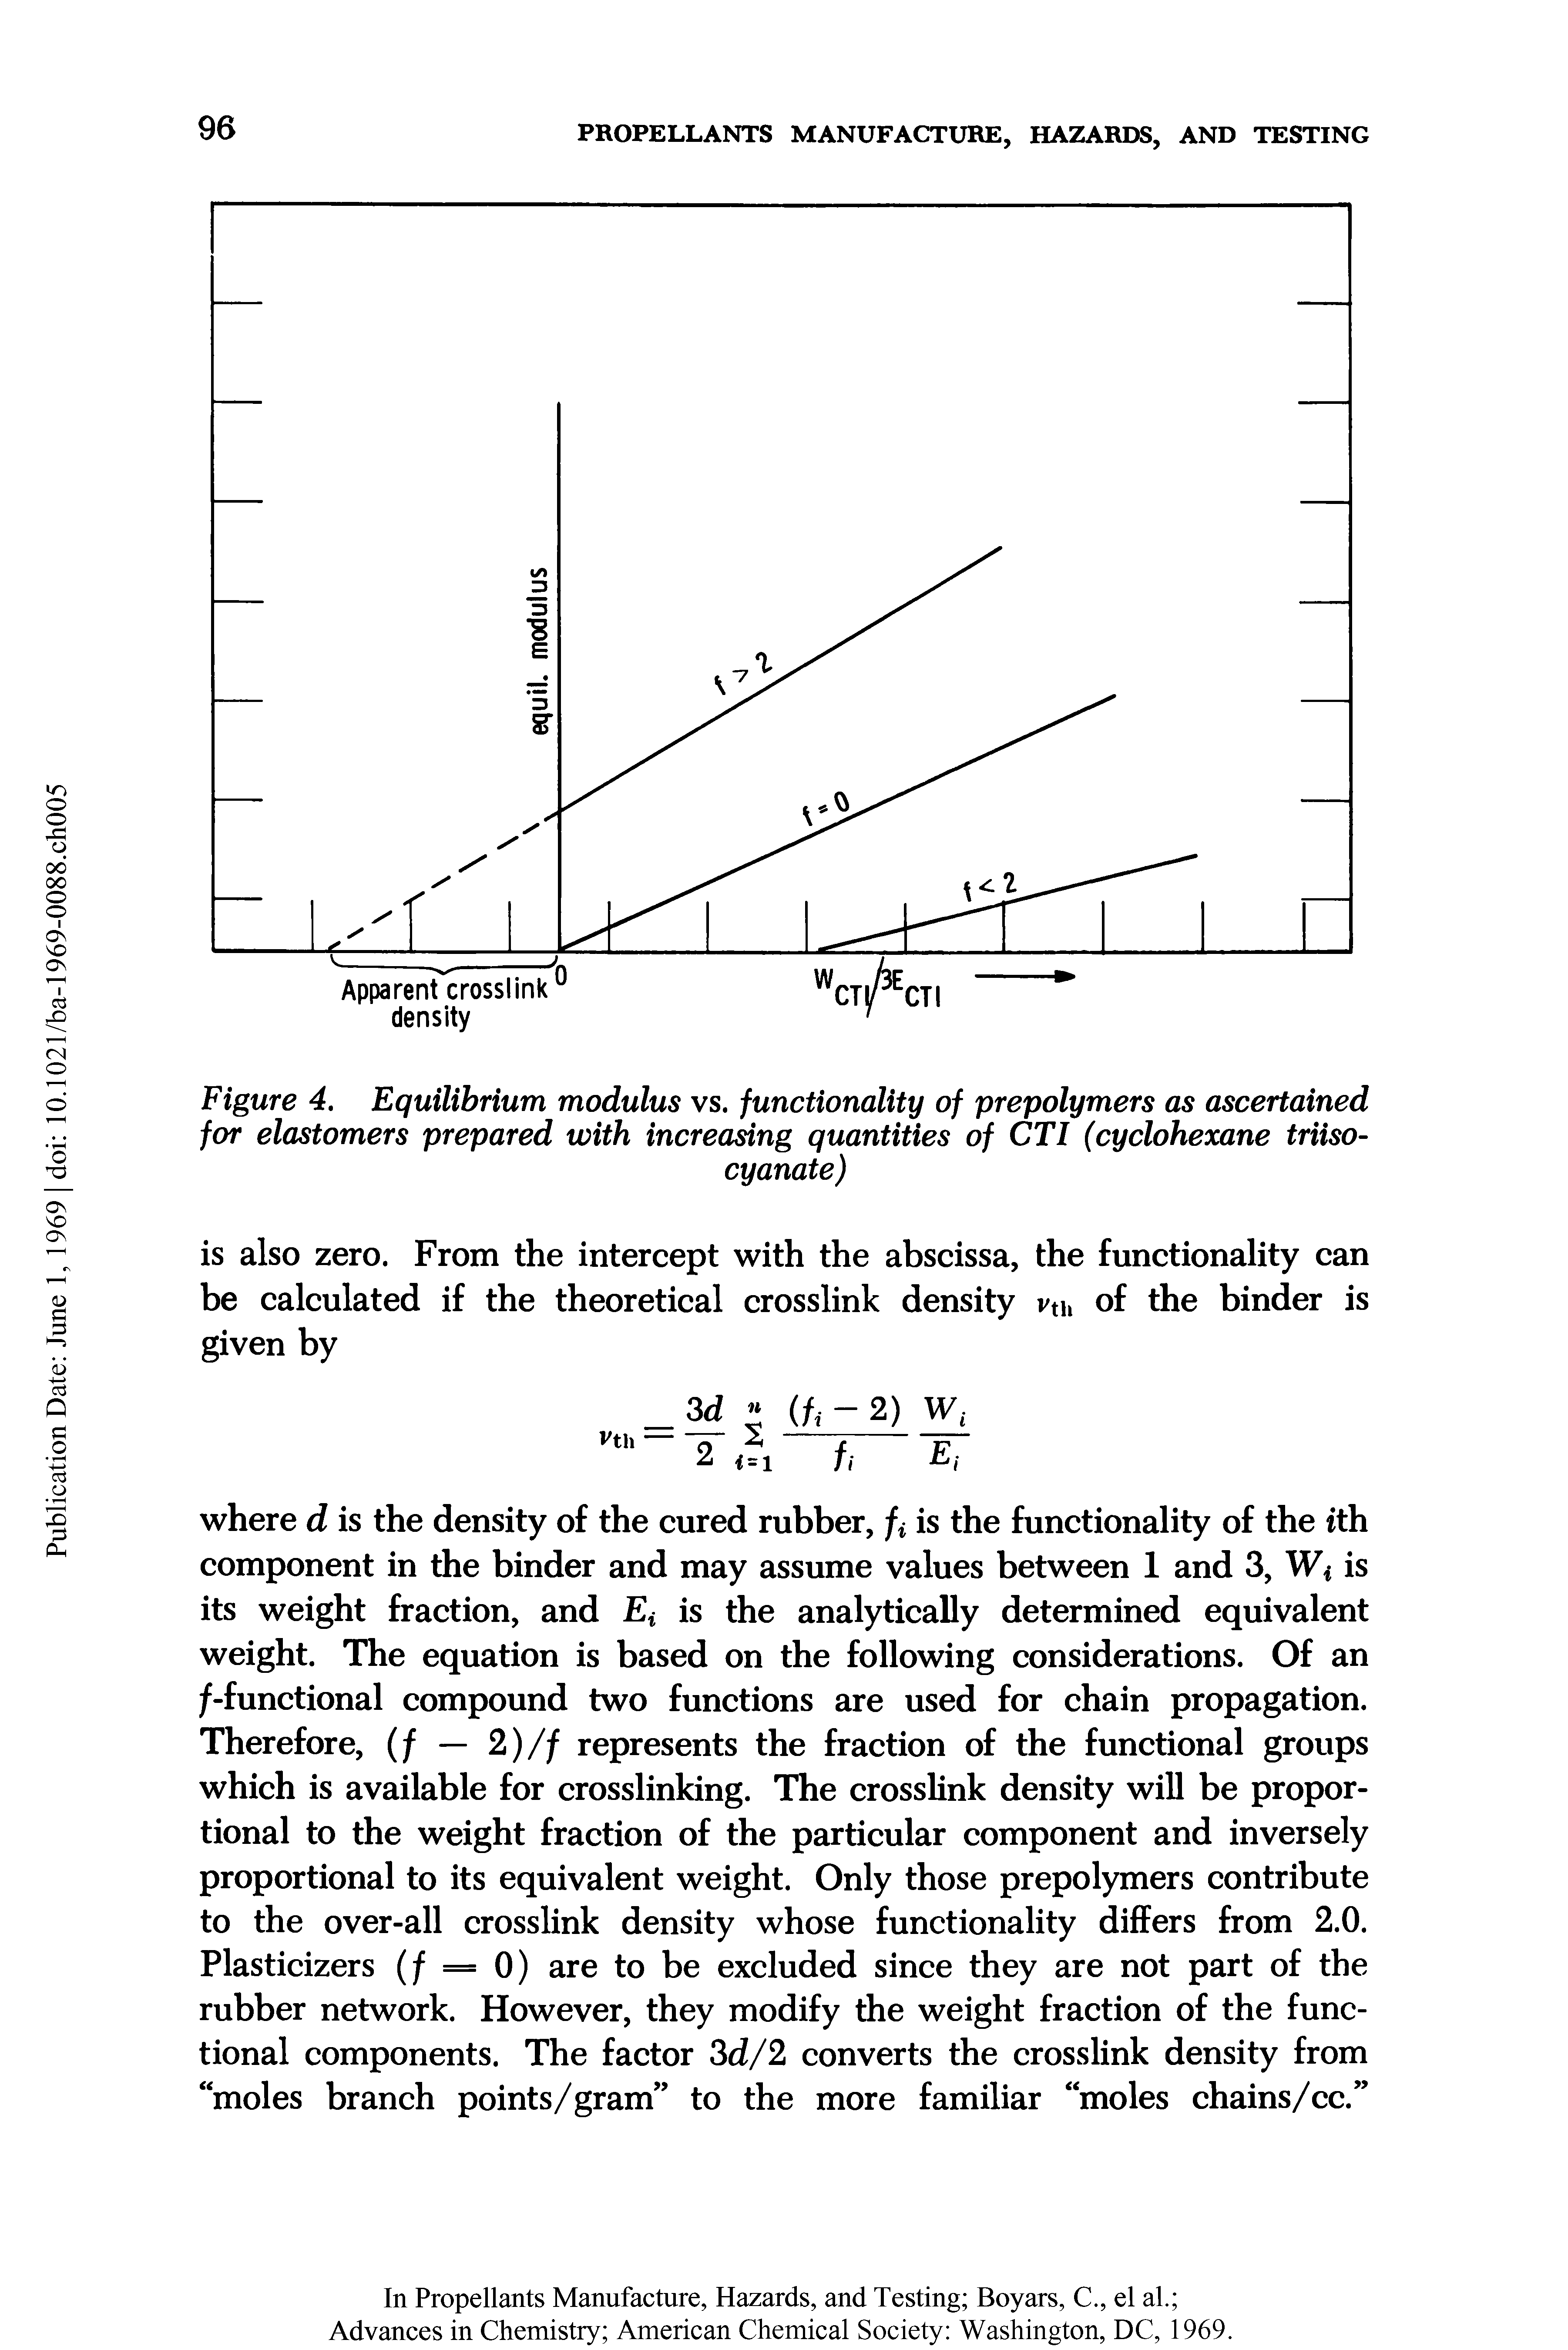 Figure 4. Equilibrium modulus vs. functionality of prepolymers as ascertained for elastomers prepared with increasing quantities of CTI (cyclohexane triisocyanate)...